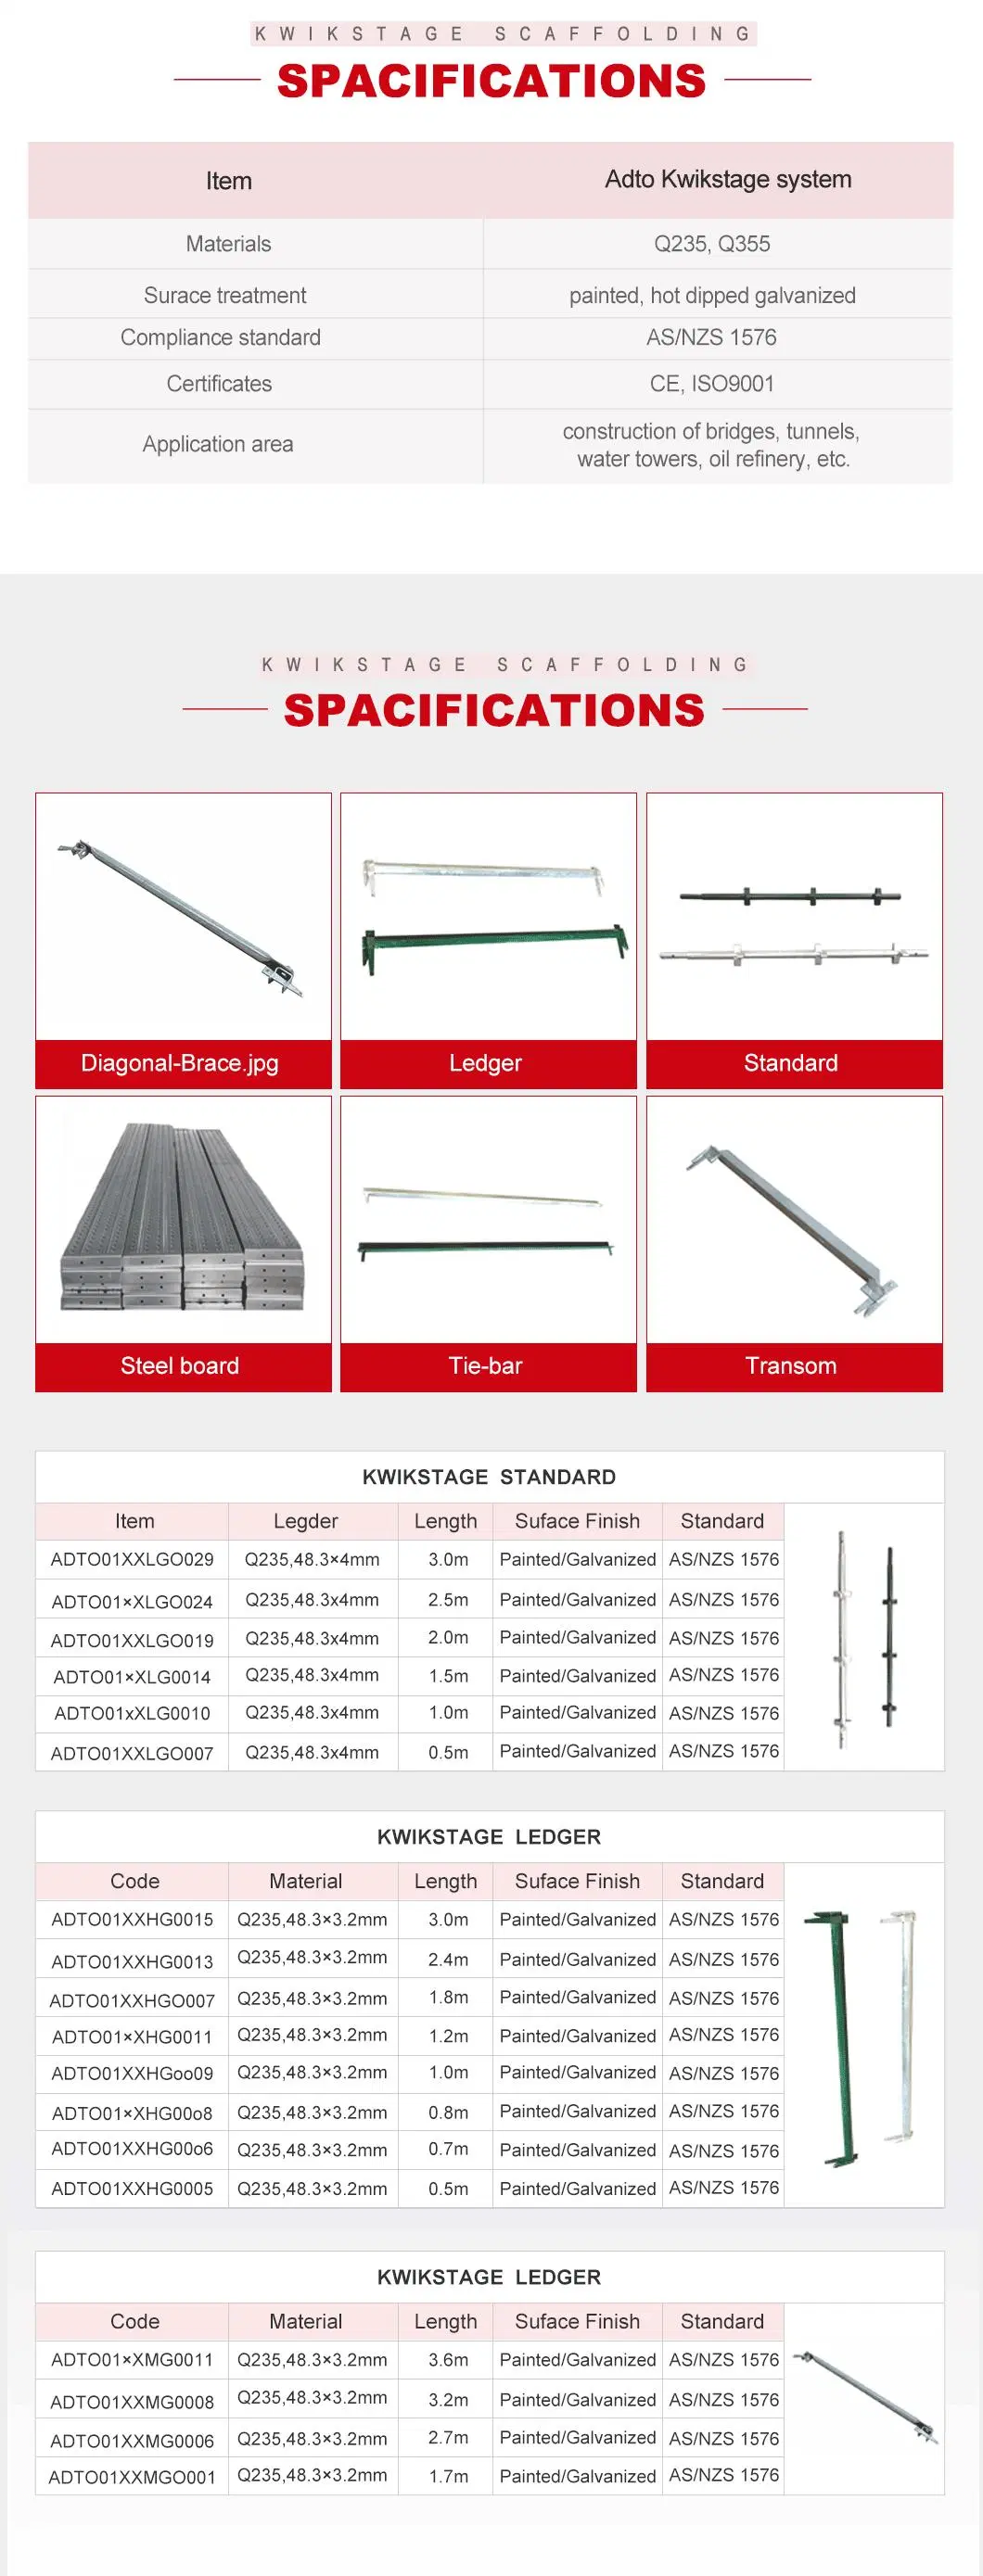 Austandard Galvanized Painting Kwikstage Scaffolding for Contruction and Building